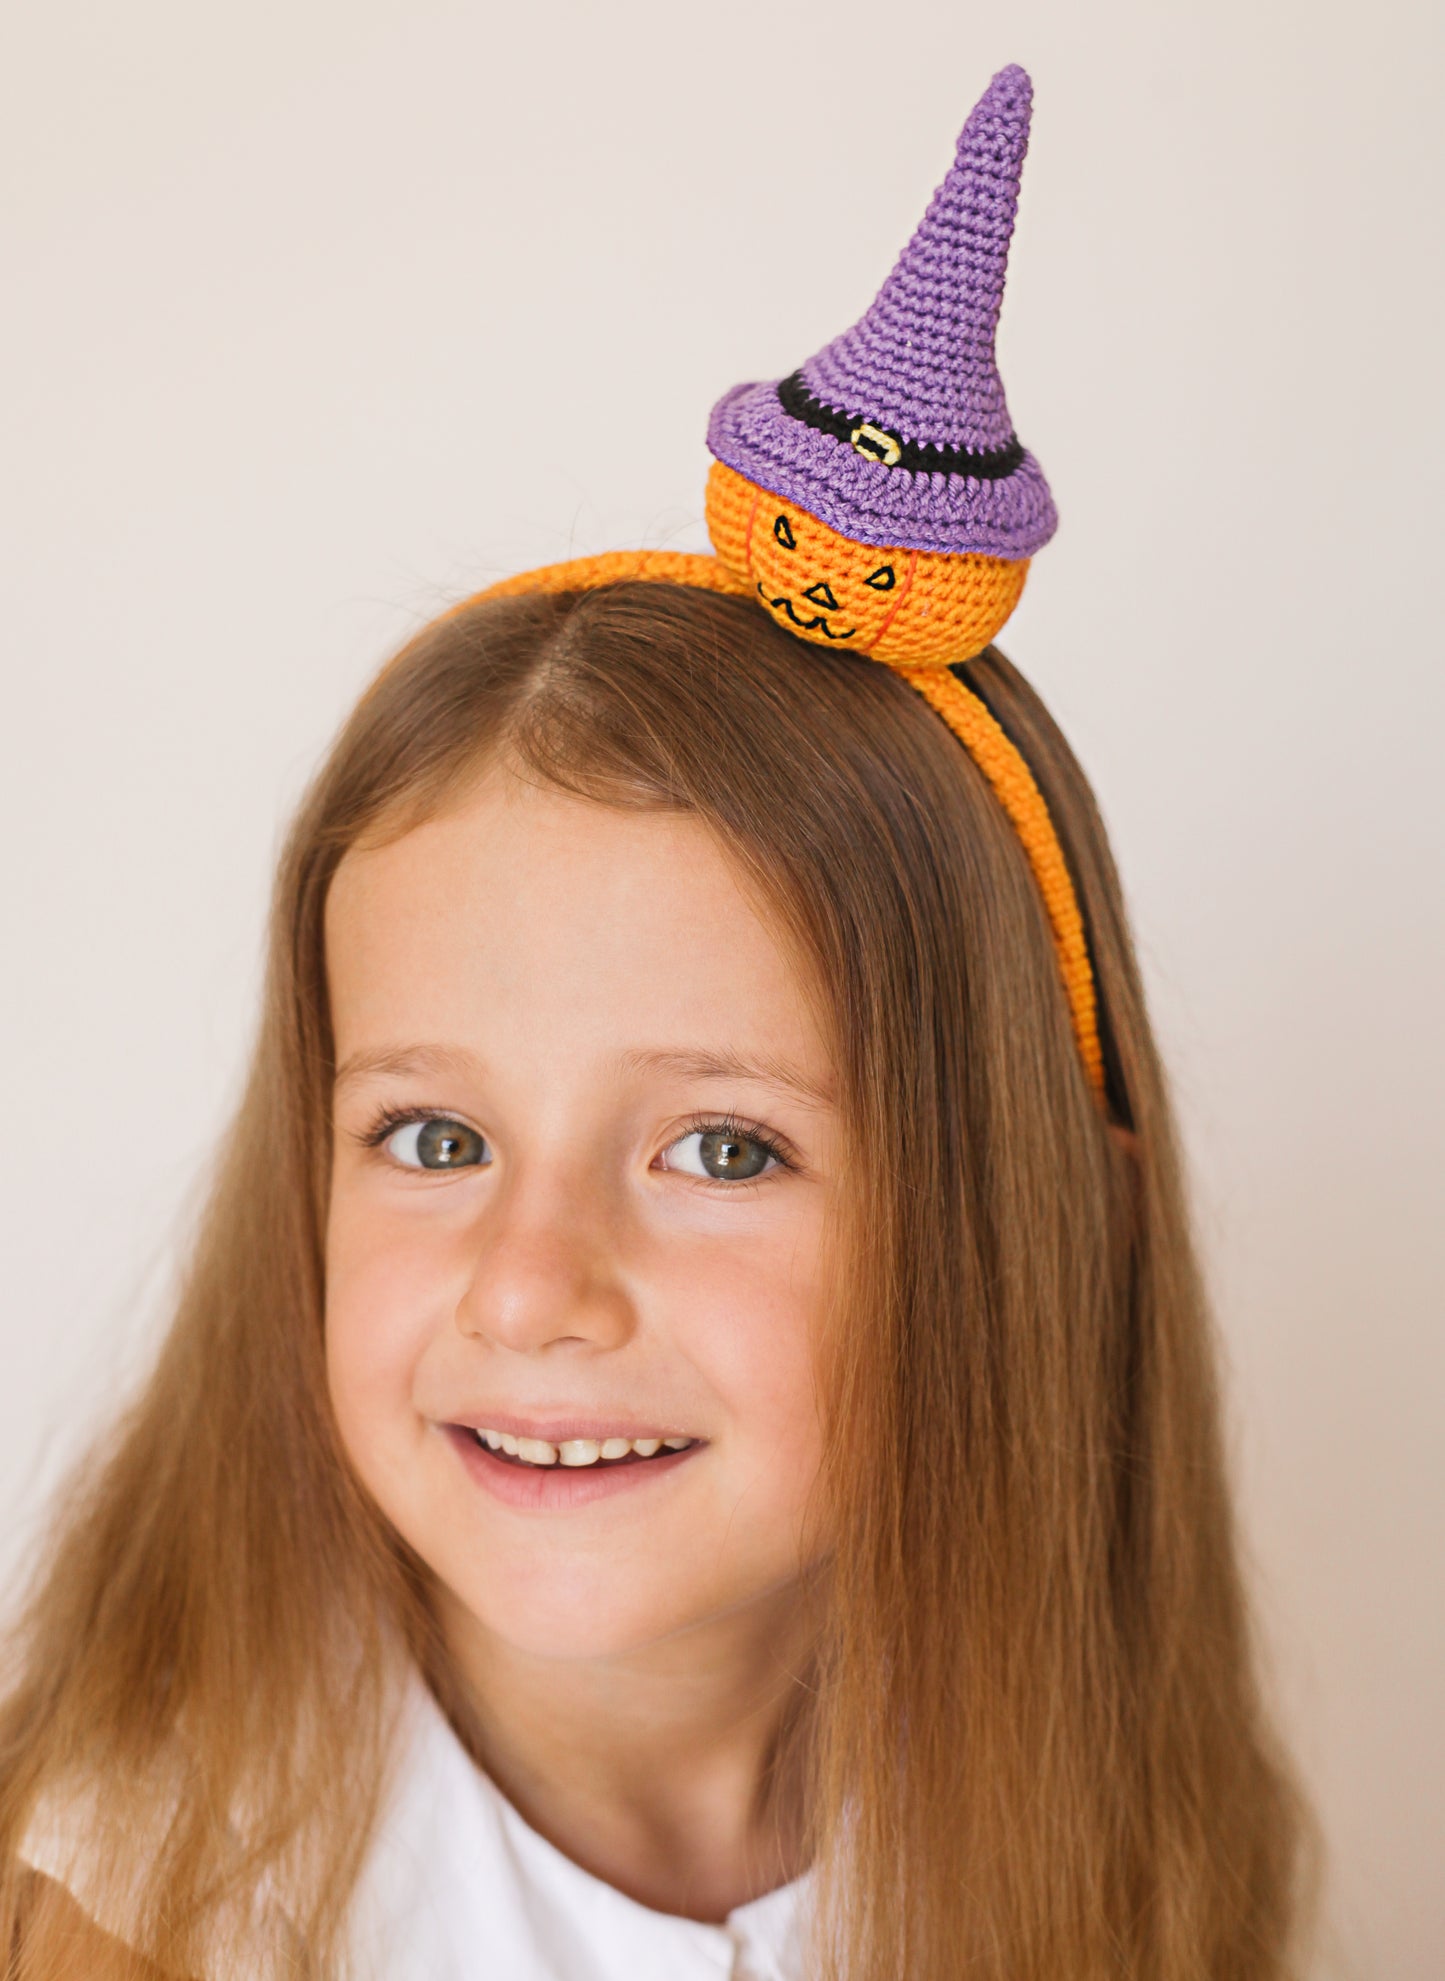 Halloween Headband Girls' Gifts : Crochet Hair Clips . Barrettes for Teens, Granddaughters, Girls Outfits, with Embroidery Designs